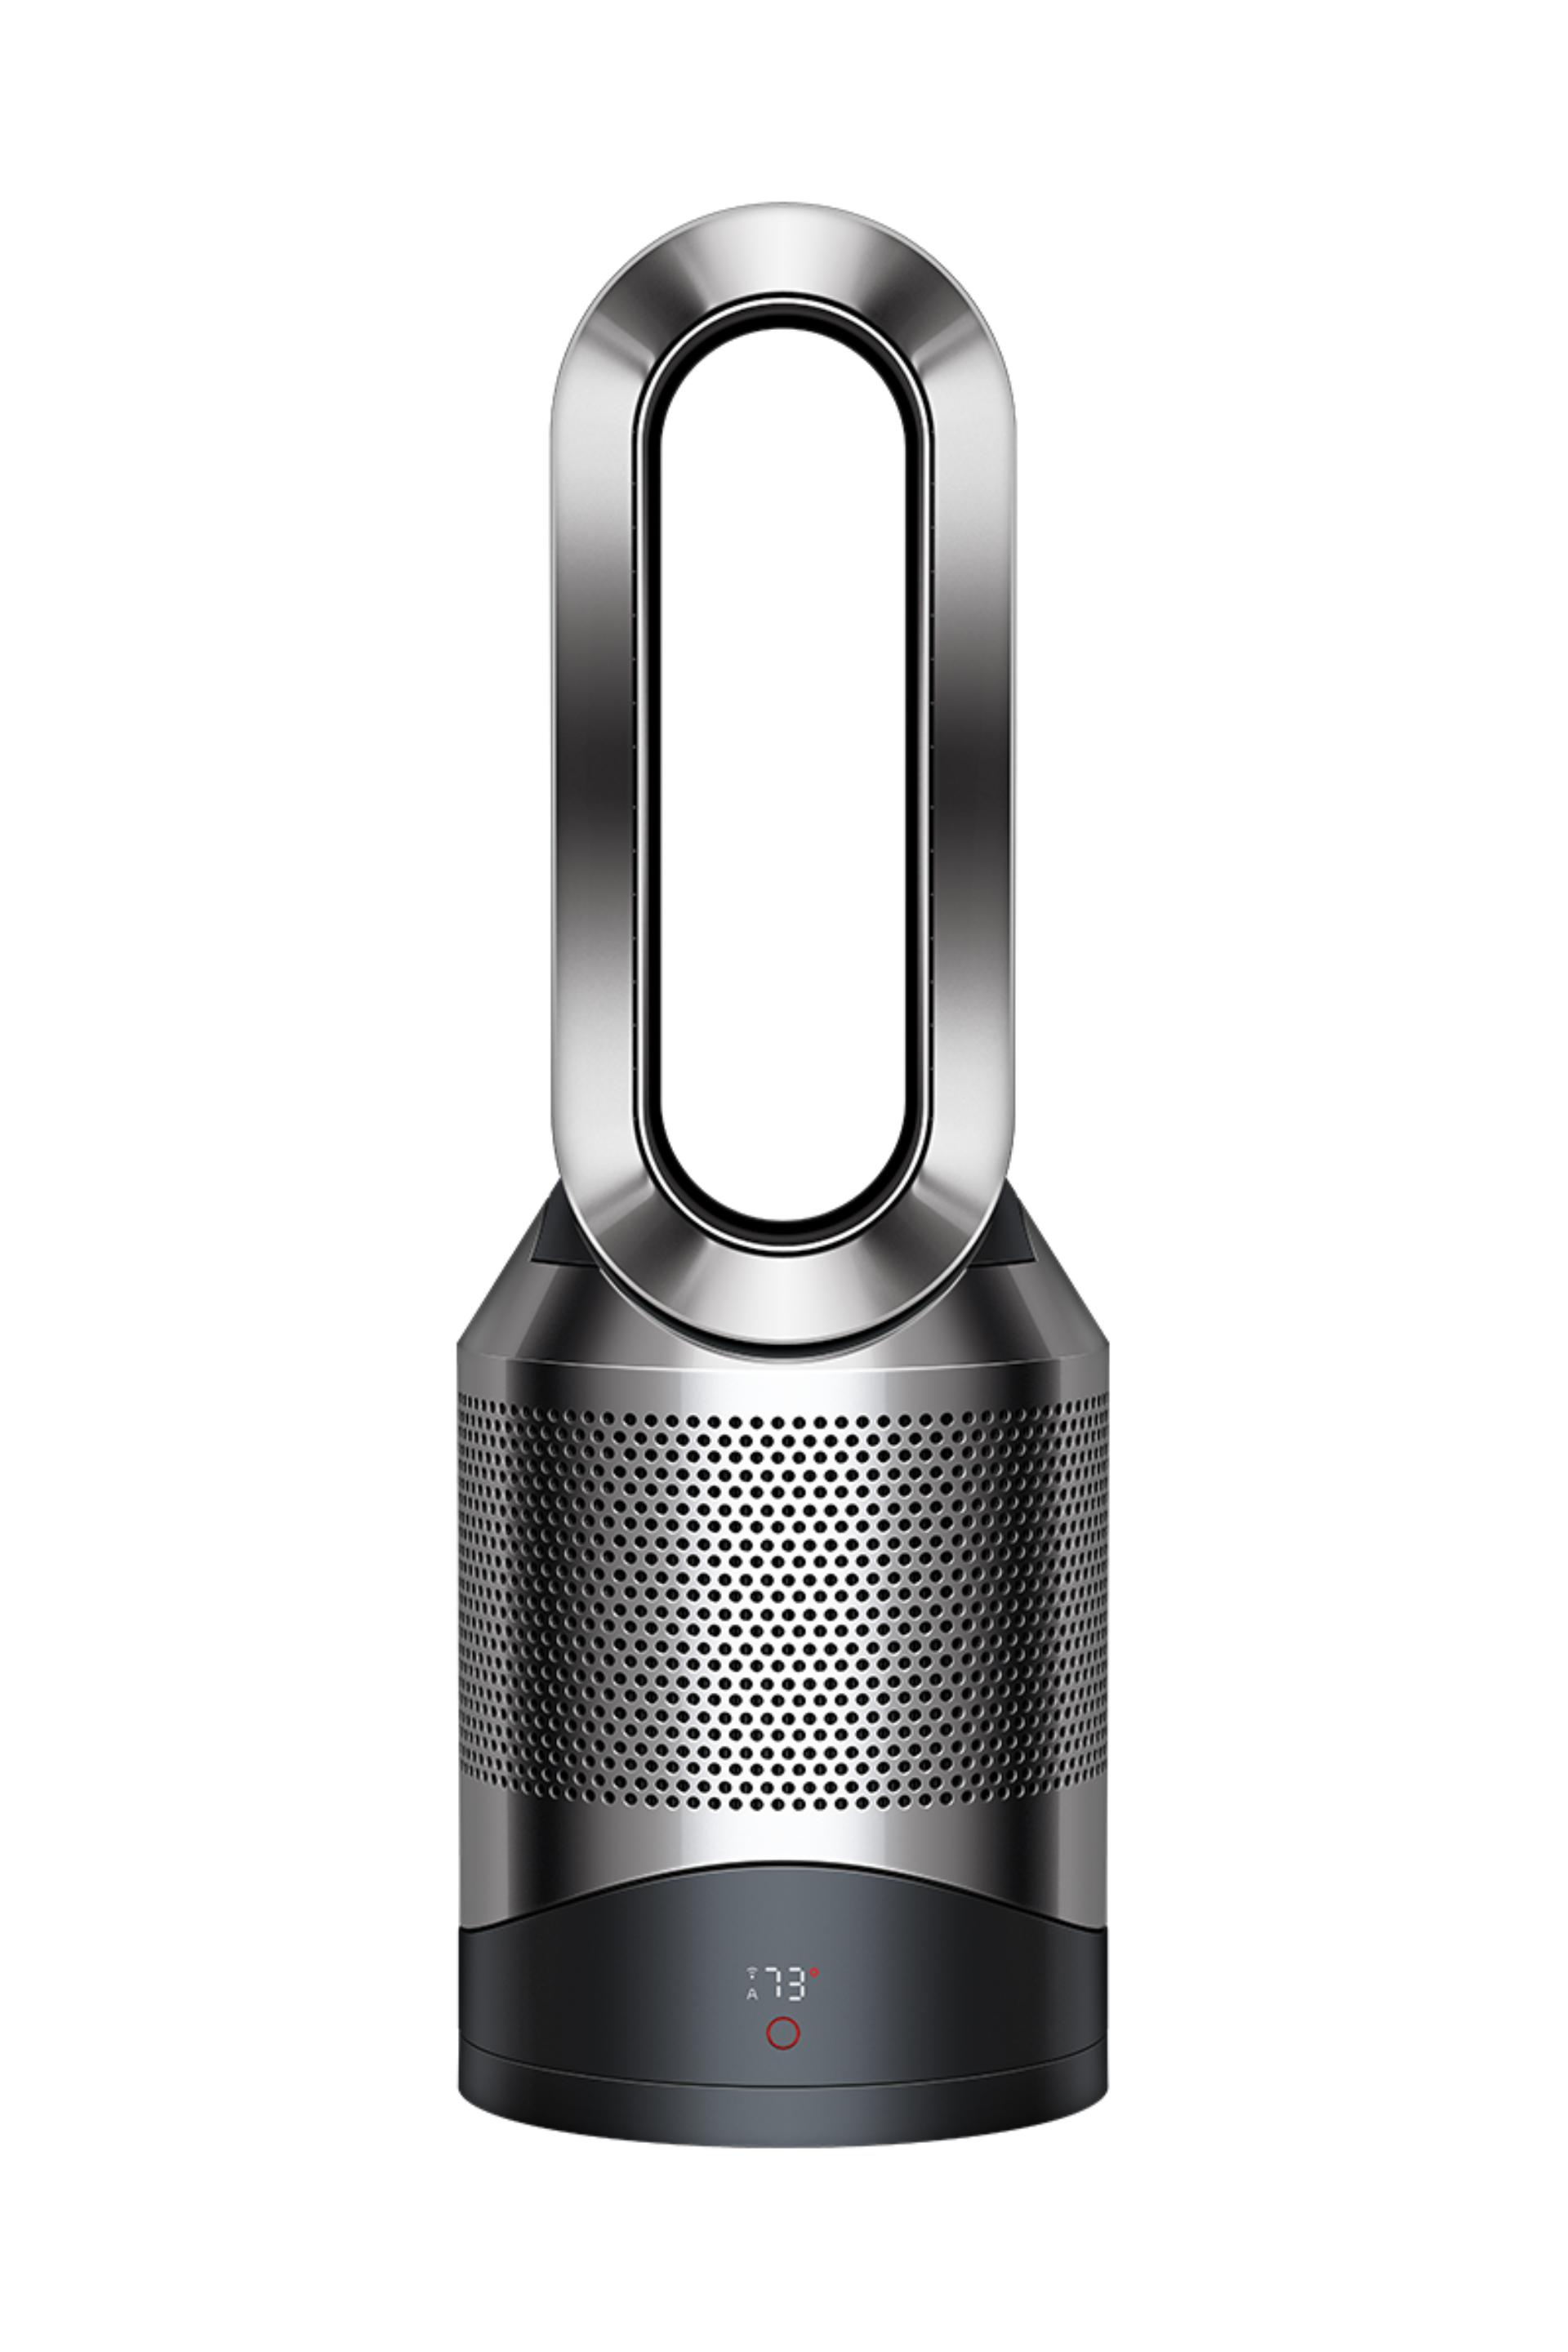 Dyson Pure Hot + Cool Link HP02 purifier heater (Black/Nickel) $420